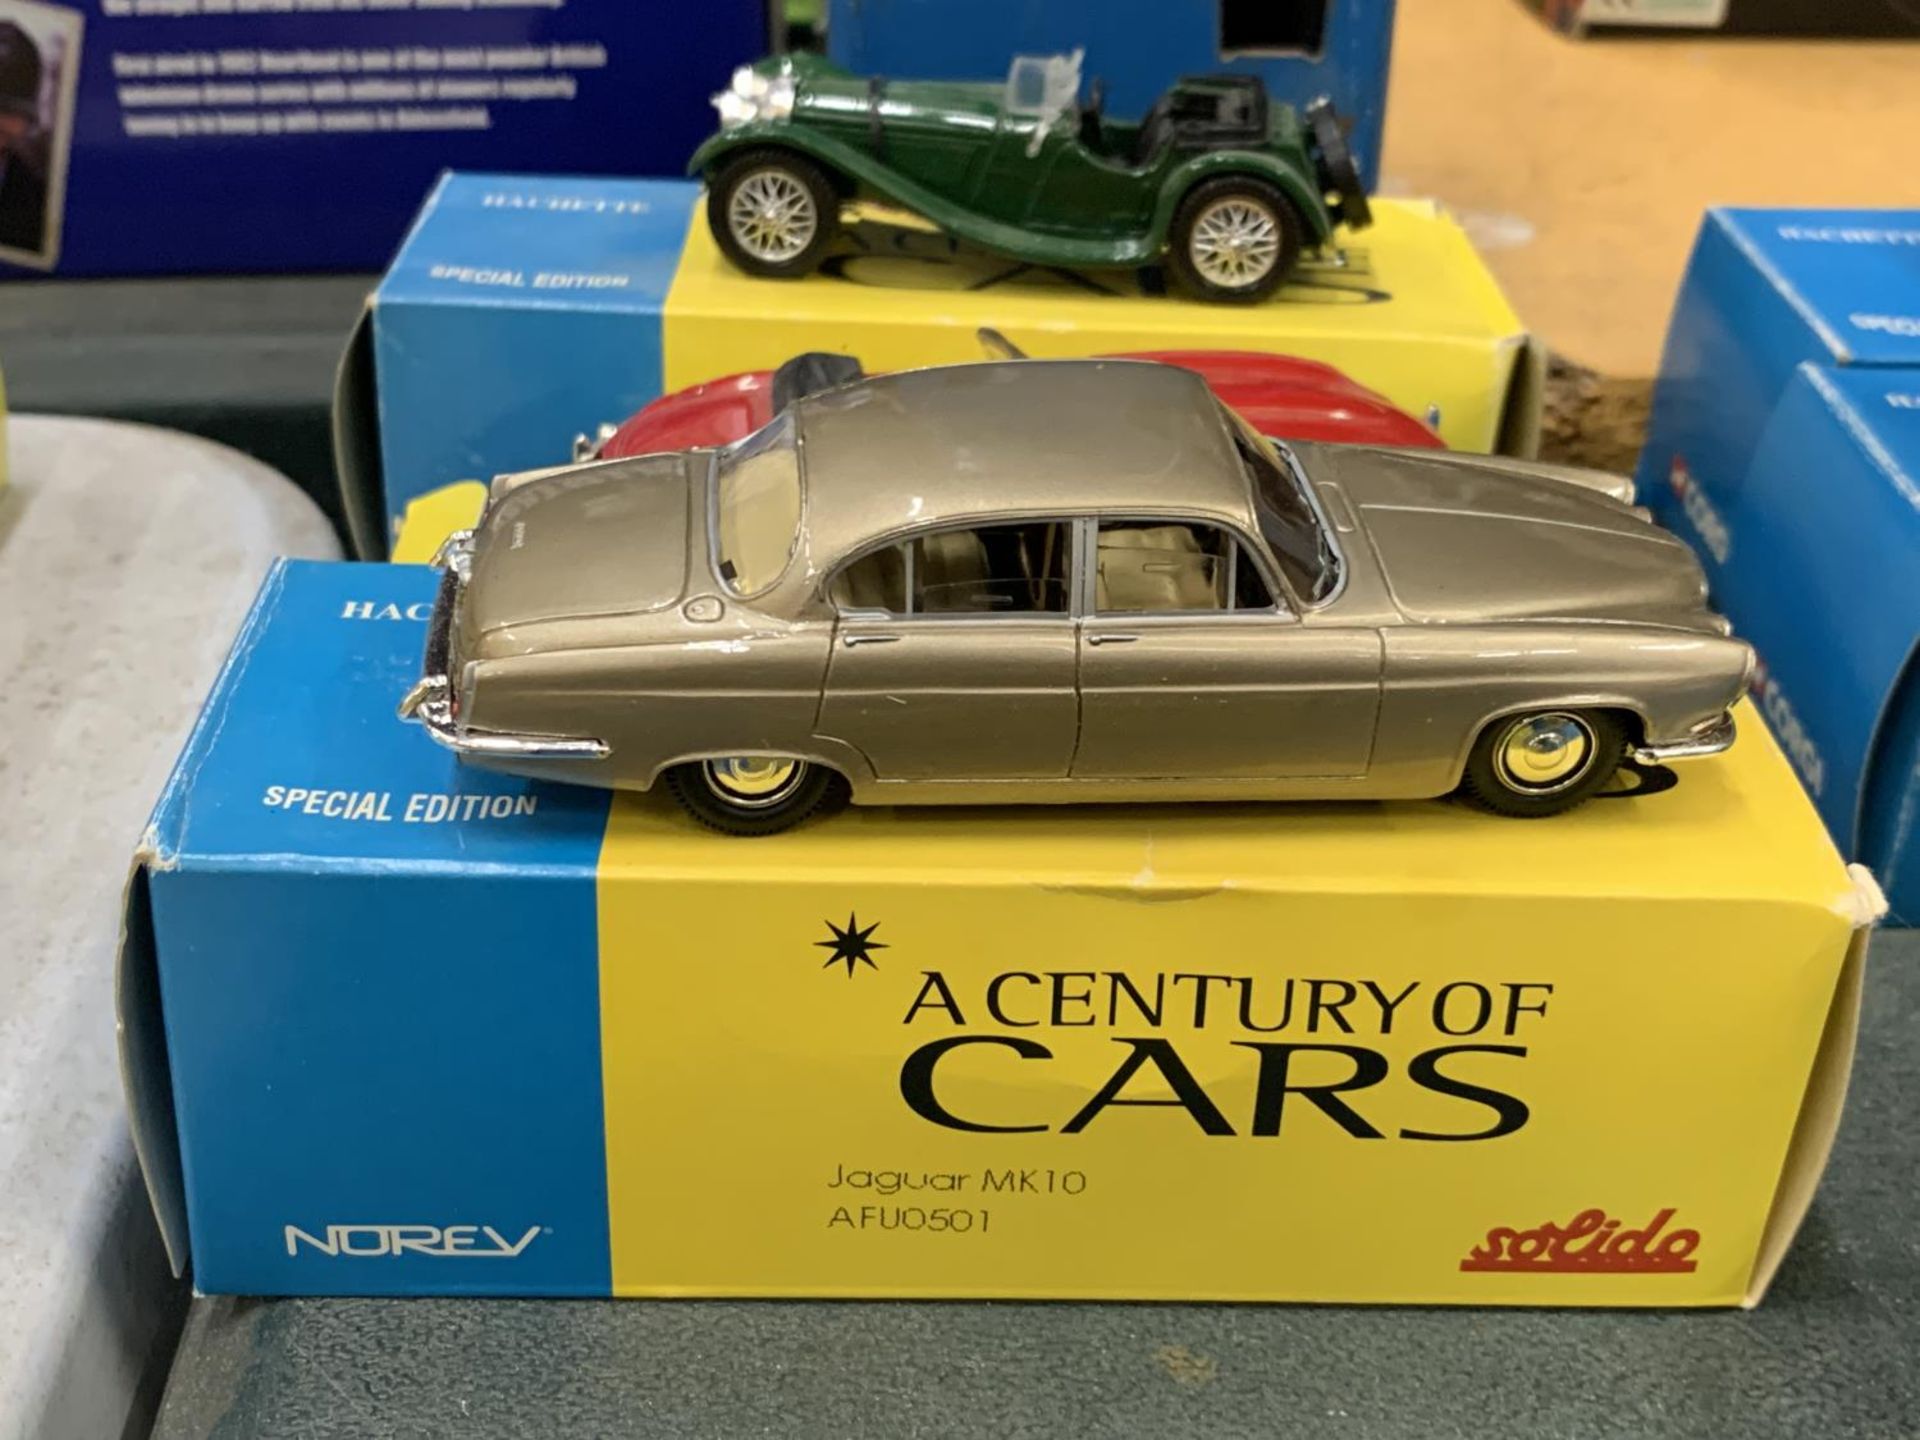 THREE BOXED CORGI 'A CENTURY OF CARS' TO INCLUDE A JAGUAR E TYPE, SS100 AND AN MK10 - Image 3 of 3